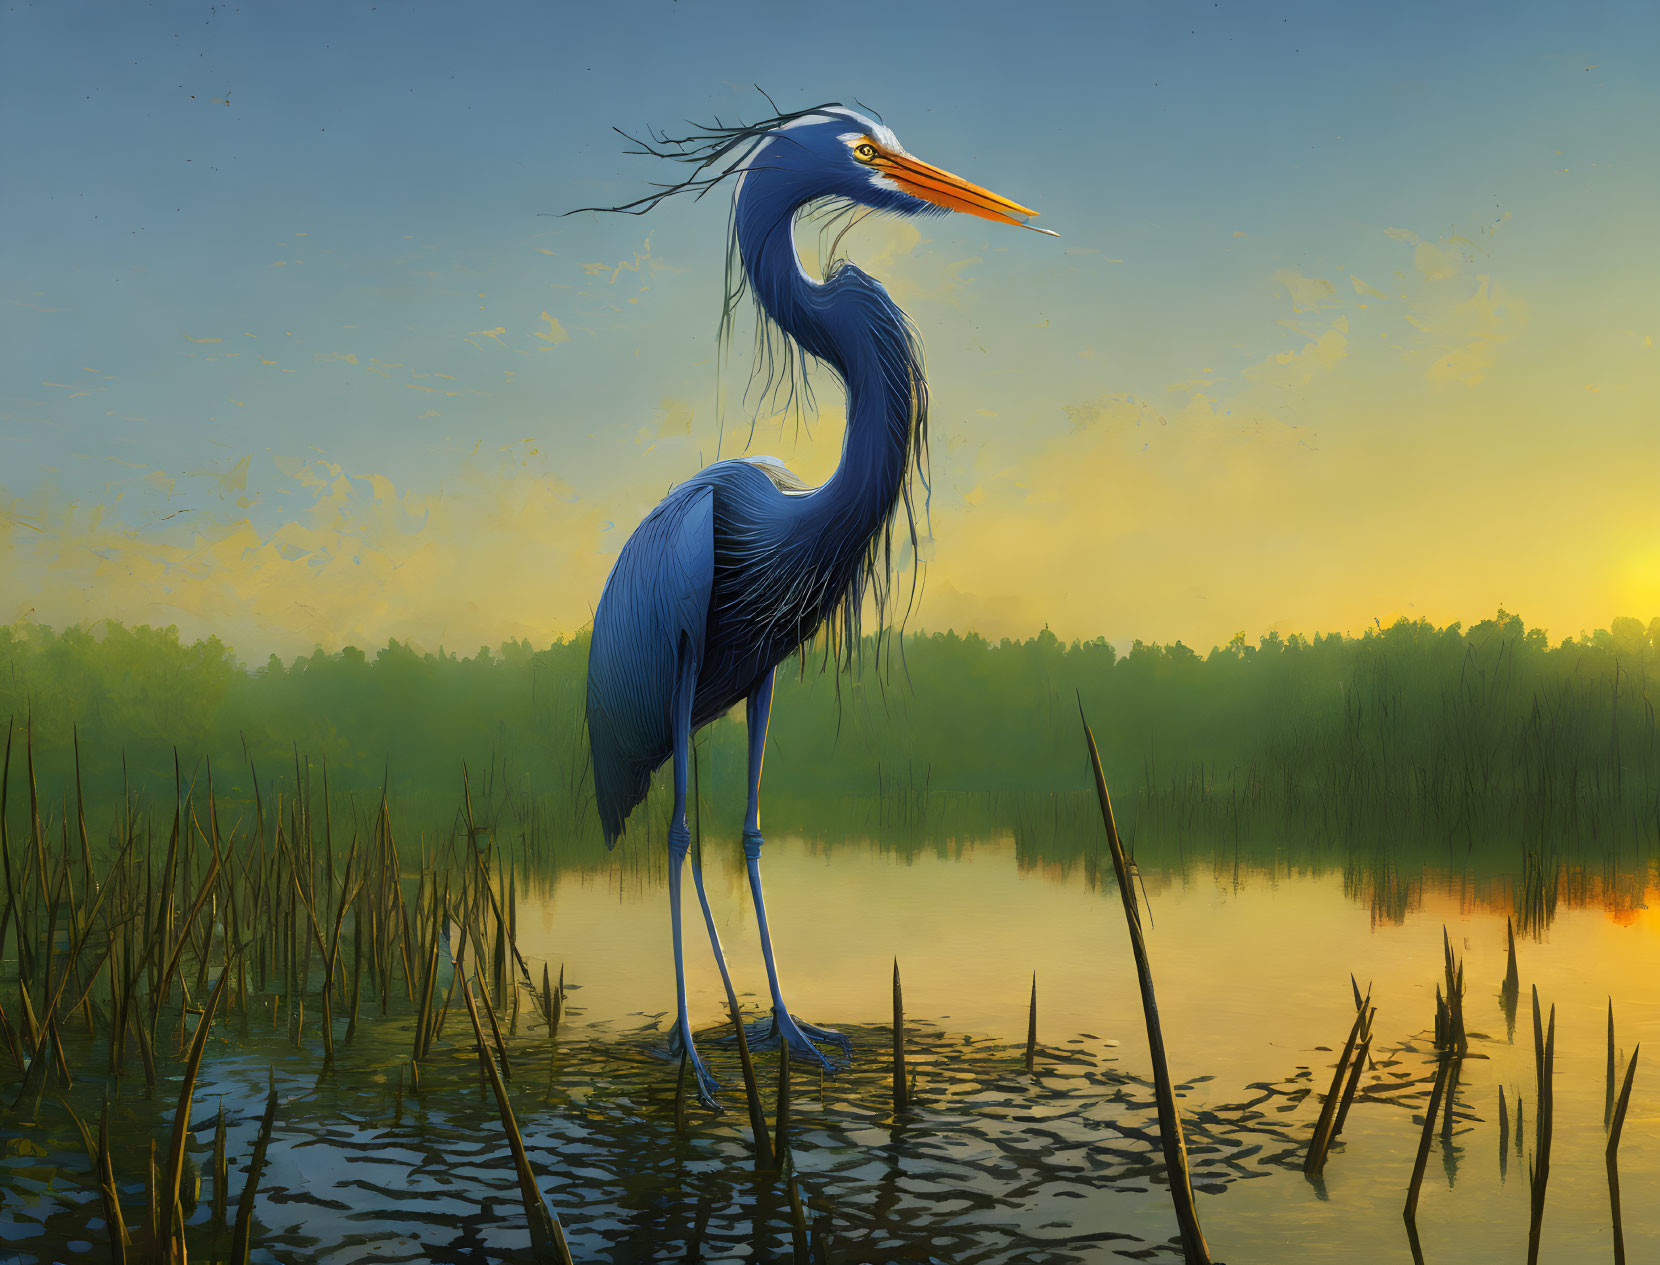 Blue heron in water at dusk with reeds and yellow sky